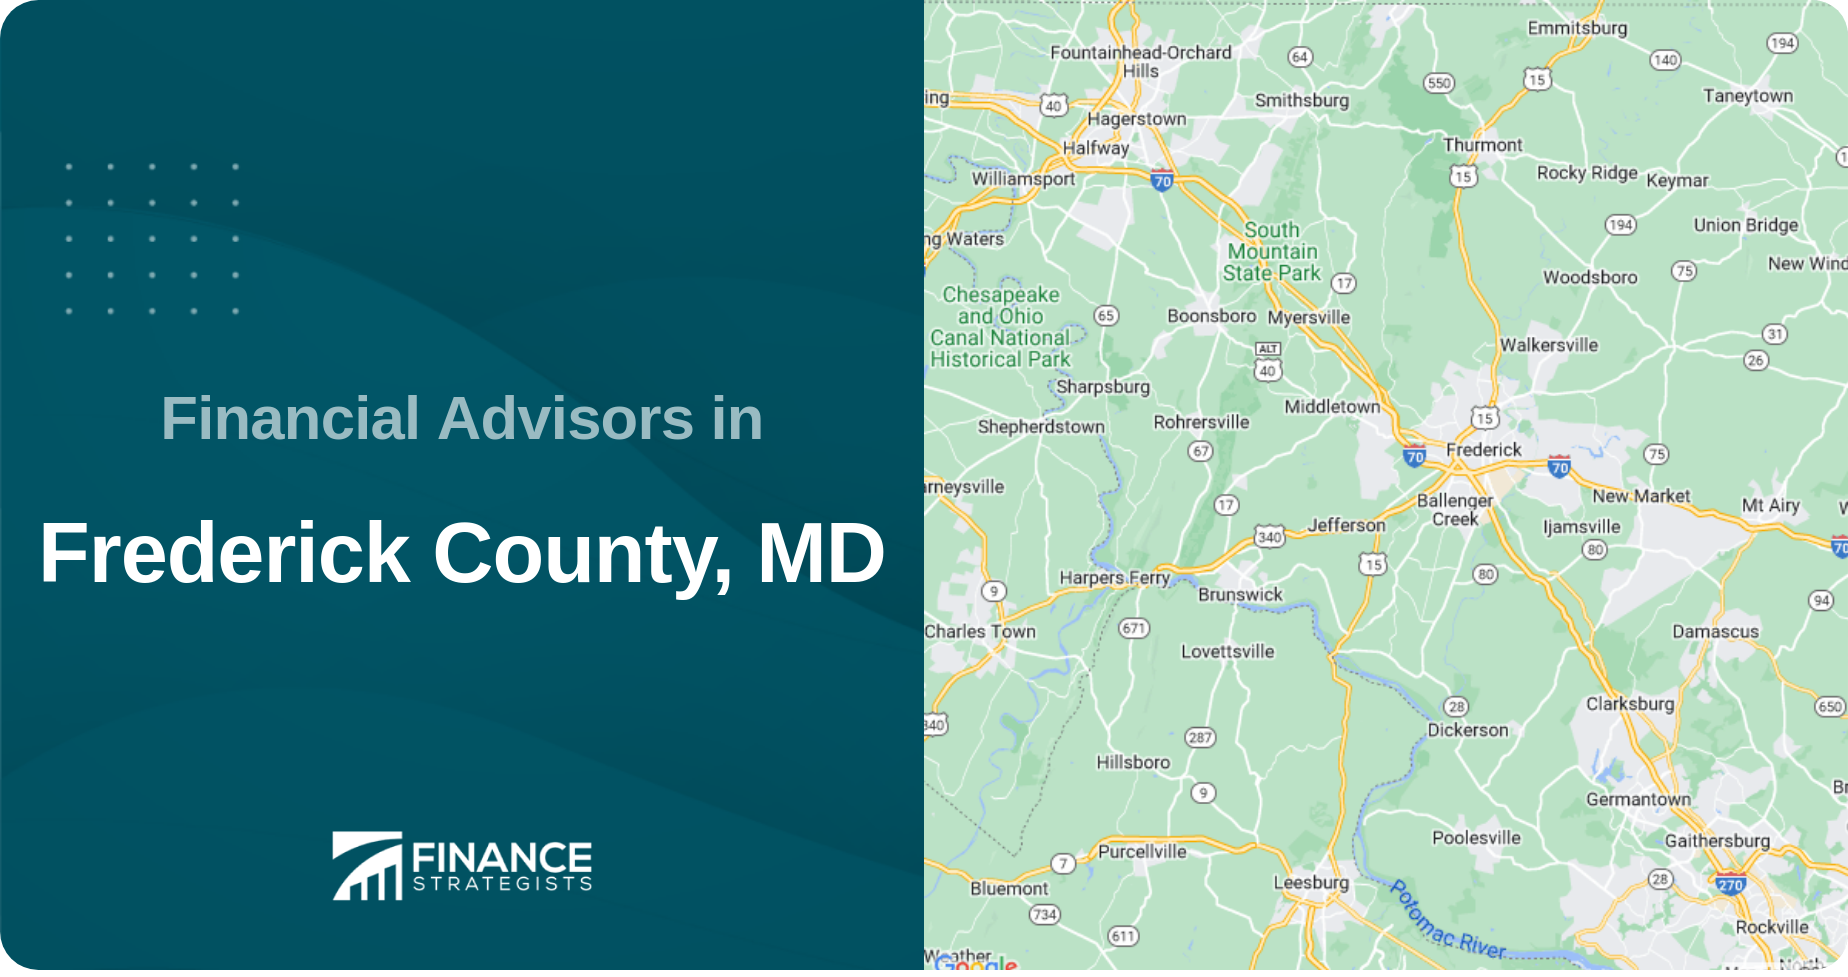 Financial Advisors in Frederick County, MD